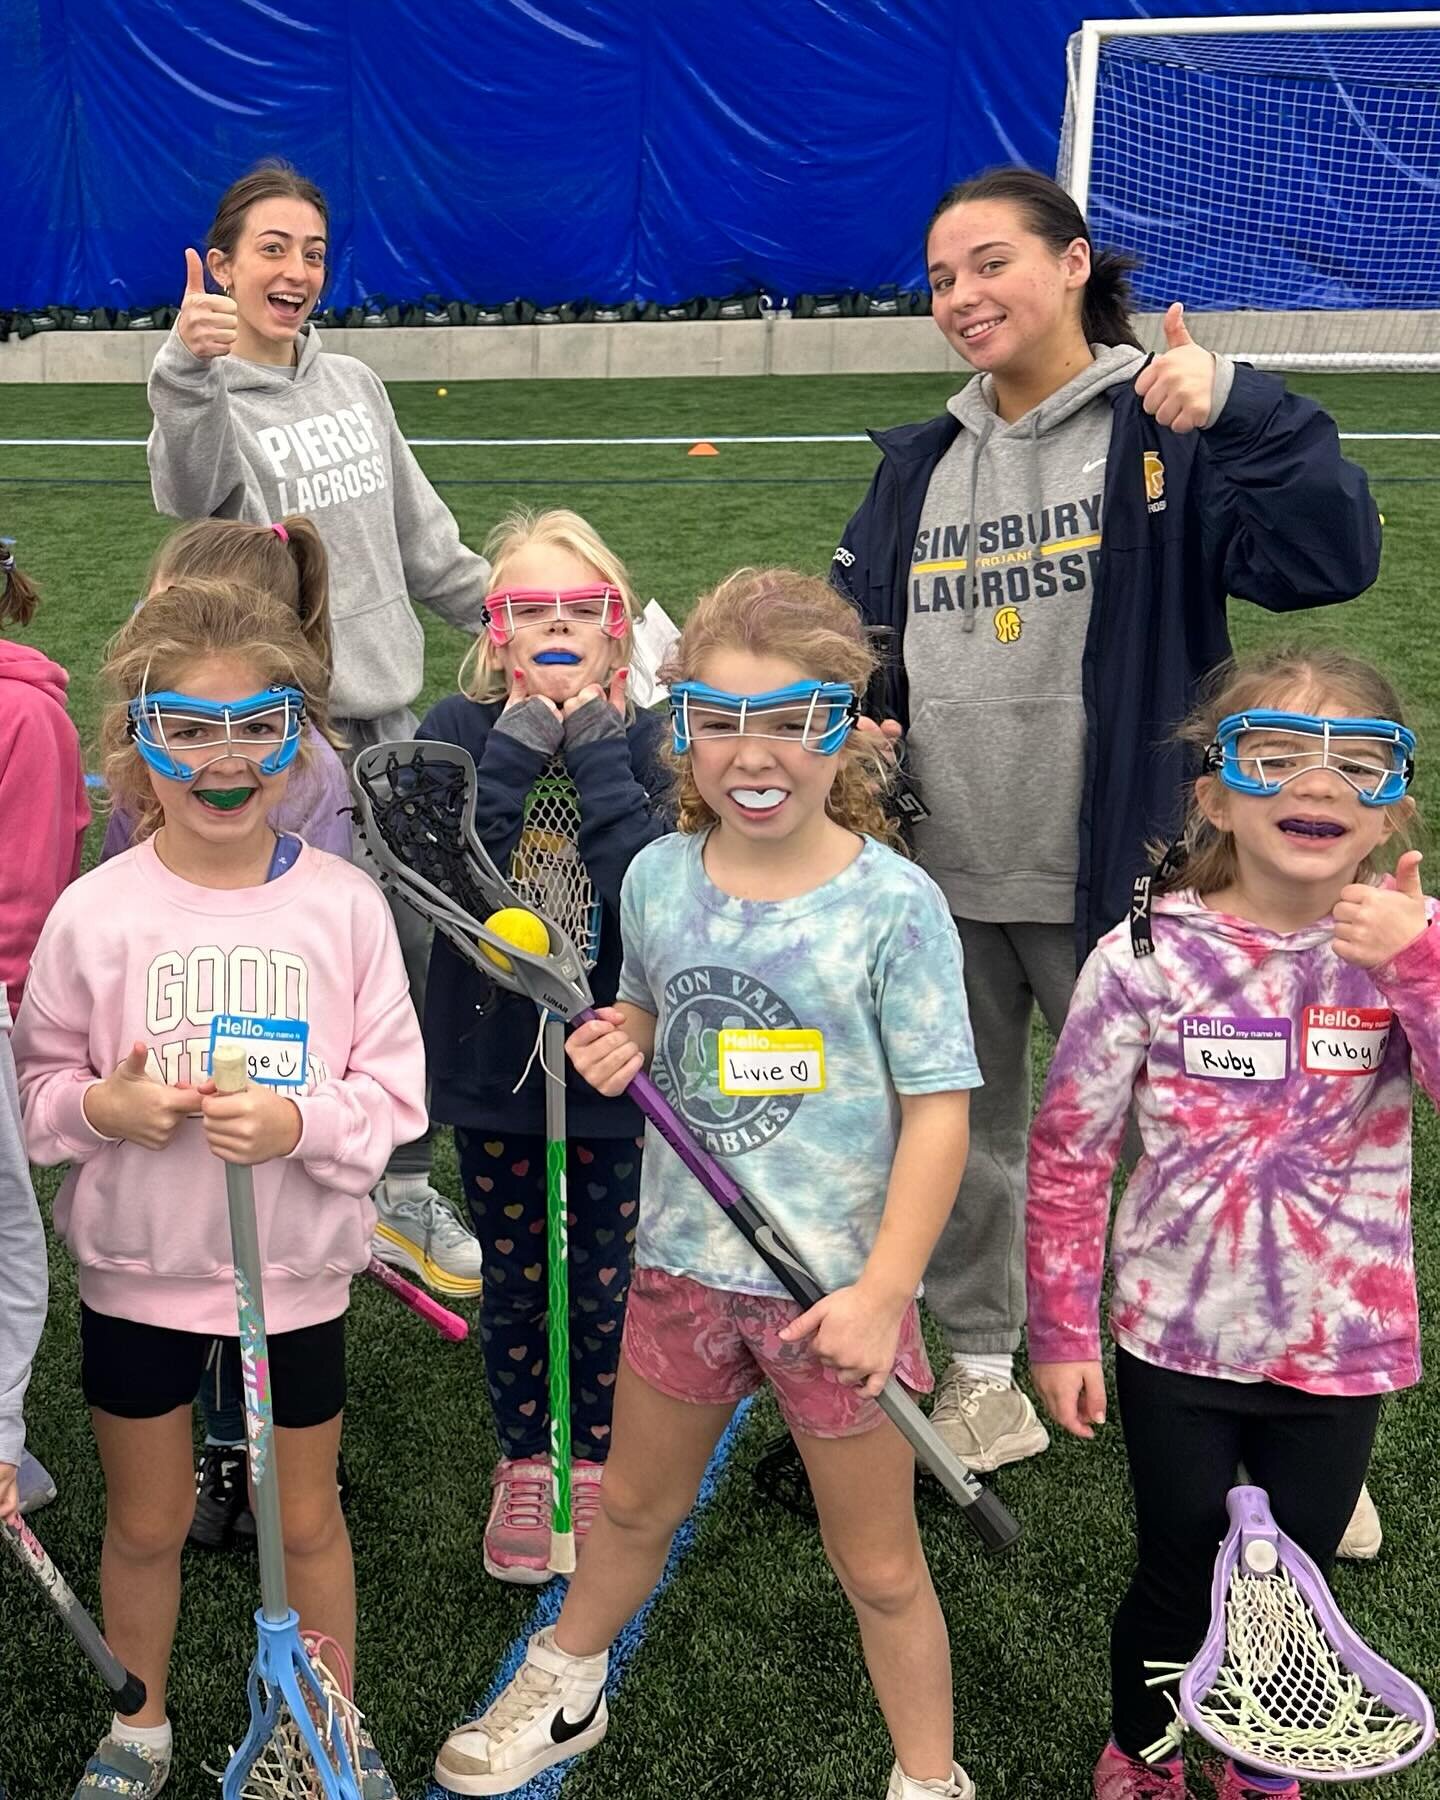 Holiday Break Clinic is over but what a fun time. Thank you to all of the players that attended.  We had so much fun!!! #shsglaxfamily #shsglaxtradition #shsglaxalumni #HAD #hustleattitudedesire